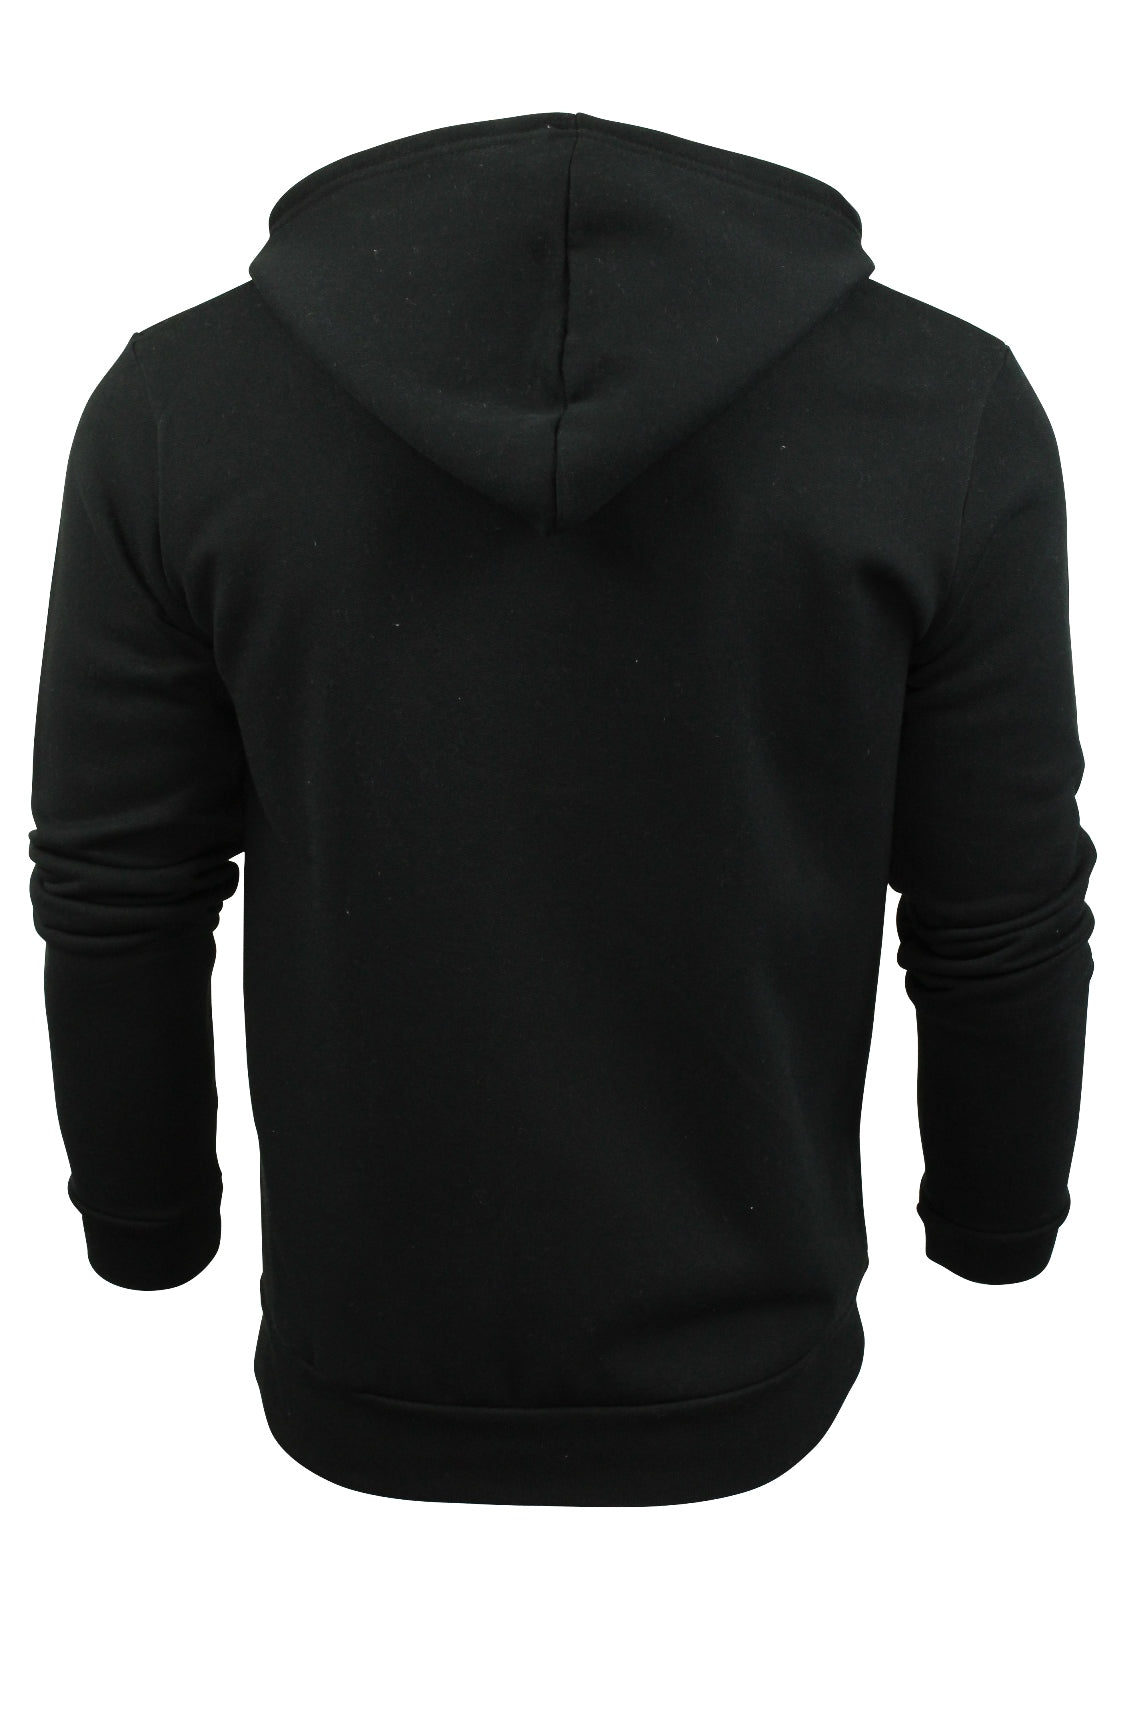 Mens Hoodie Sweat-Top by Xact Clothing Made in England (Black)-3